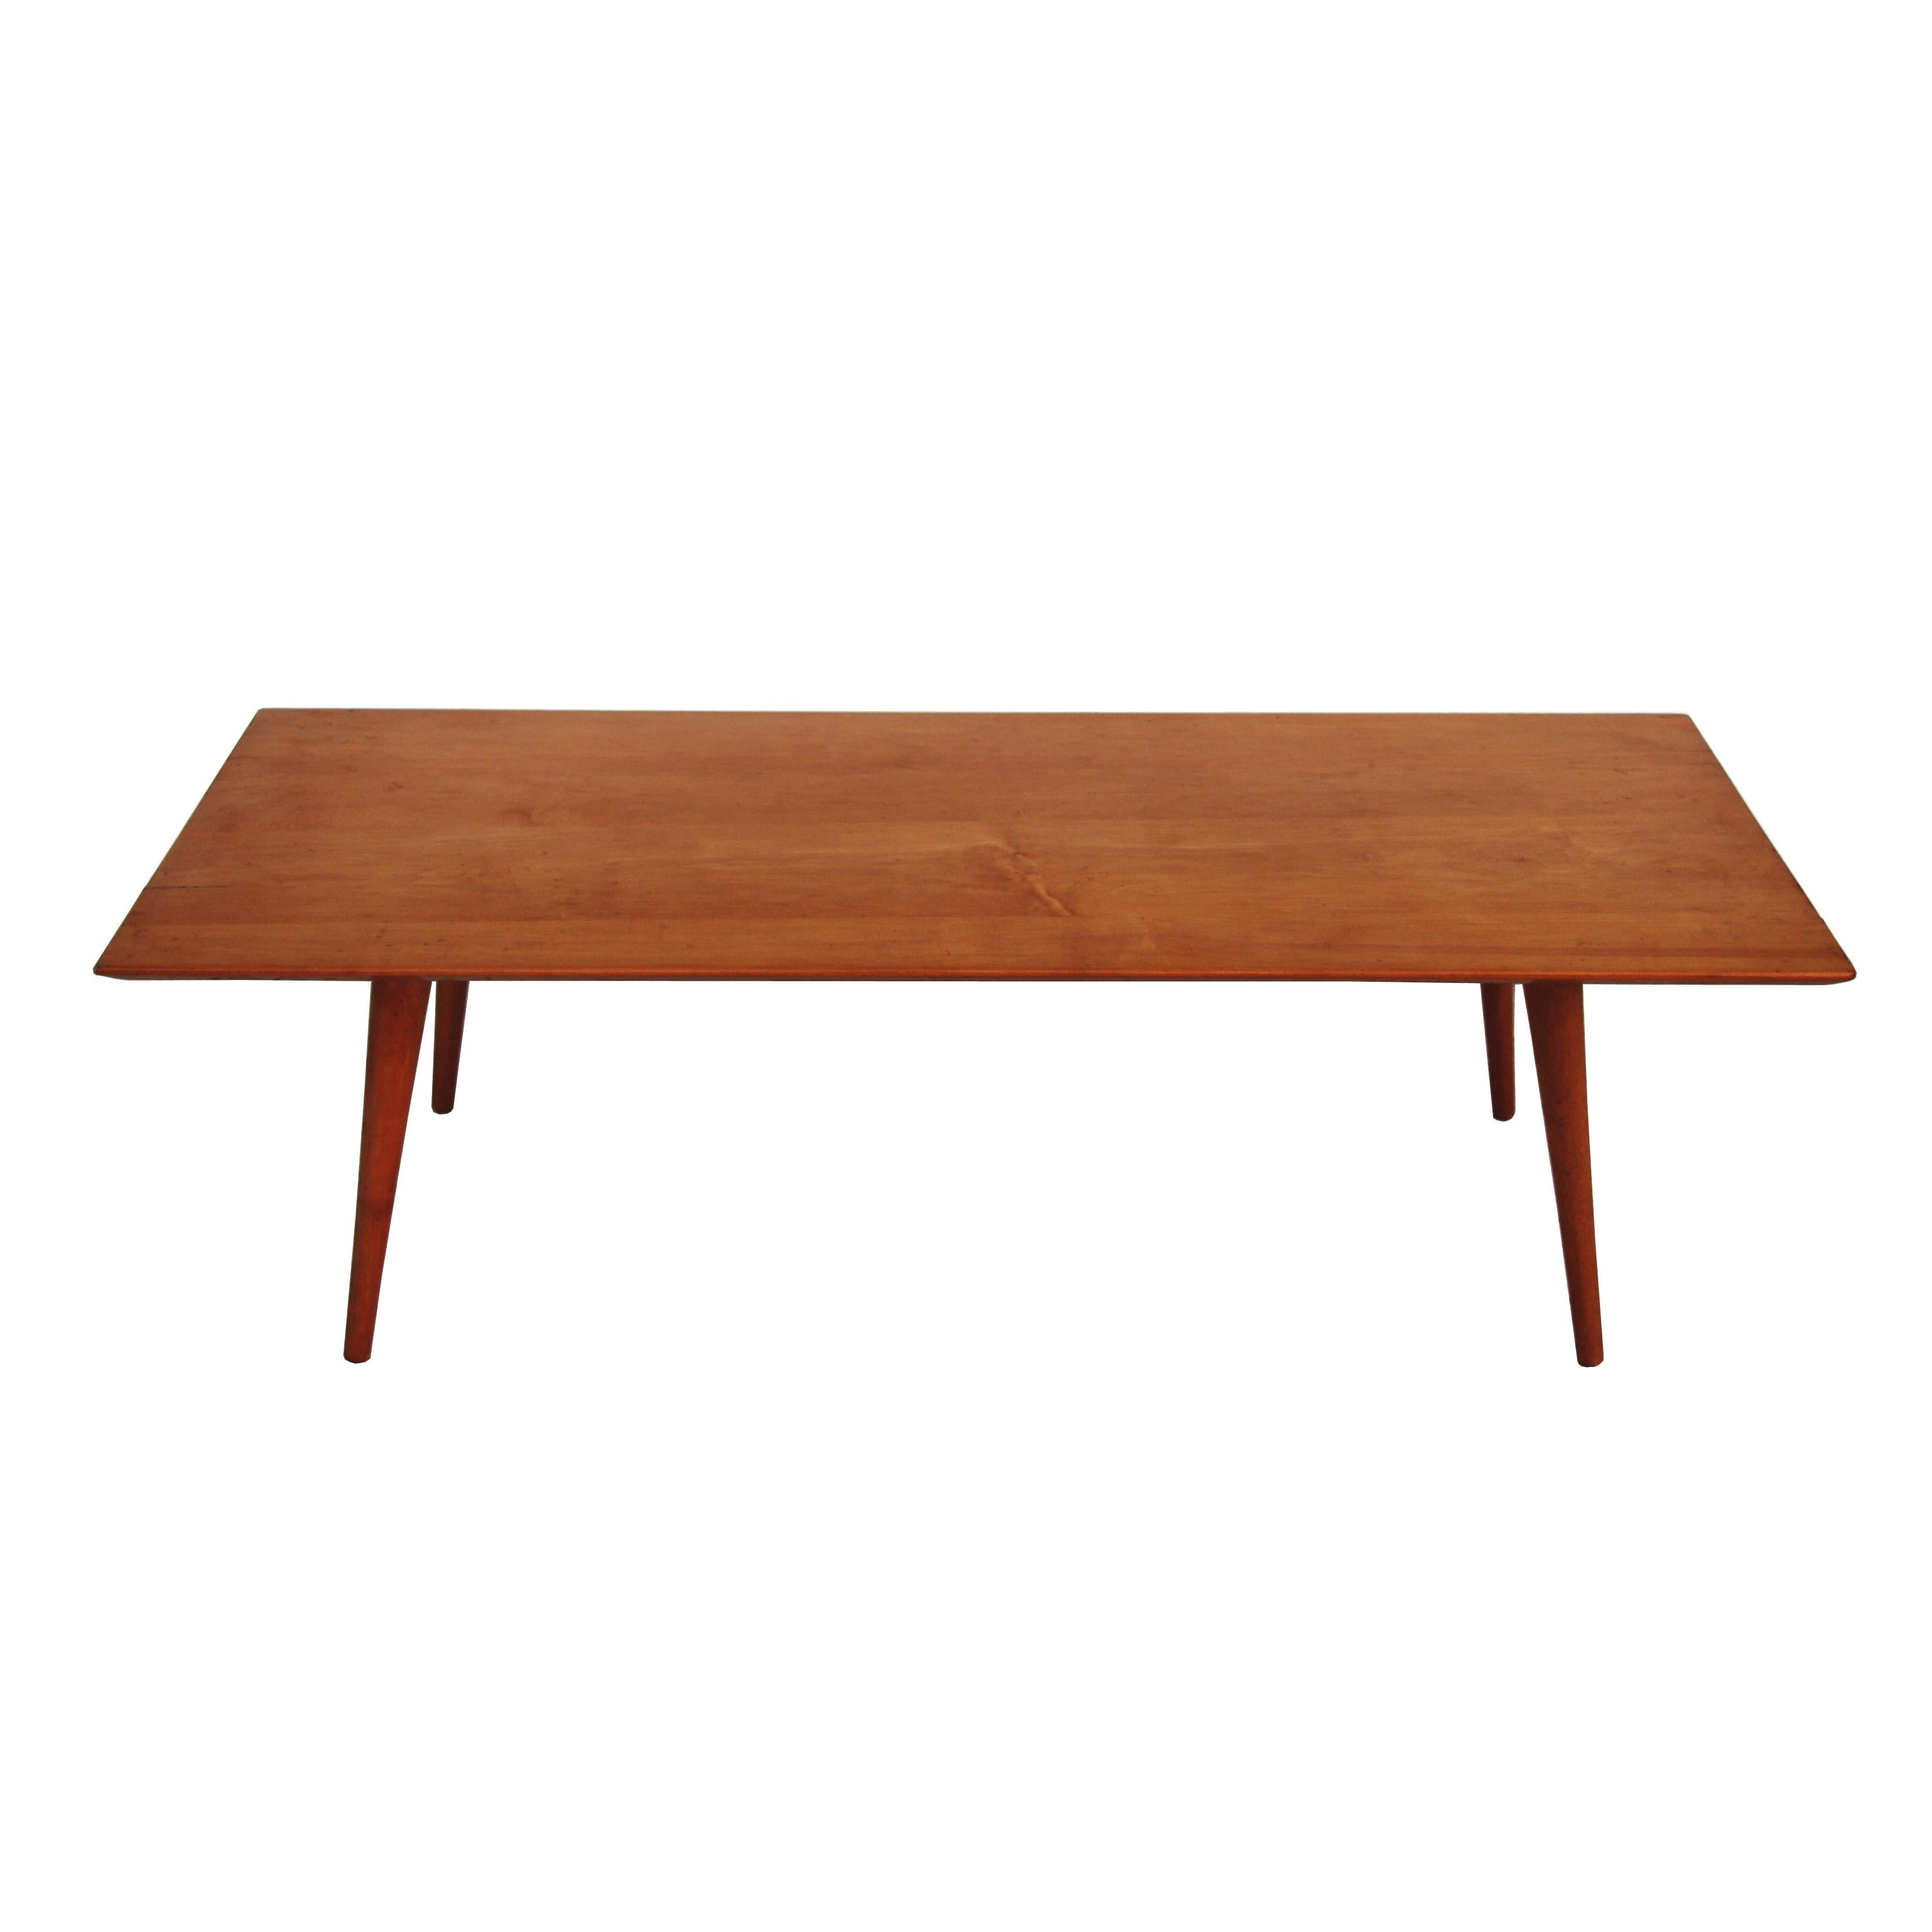 A Mid-Century Modern coffee table or bench designed by Paul McCobb and made by Winchendon.

 It features the simple lines, tapered legs and maple construction of Winchedon's Planner Group series.